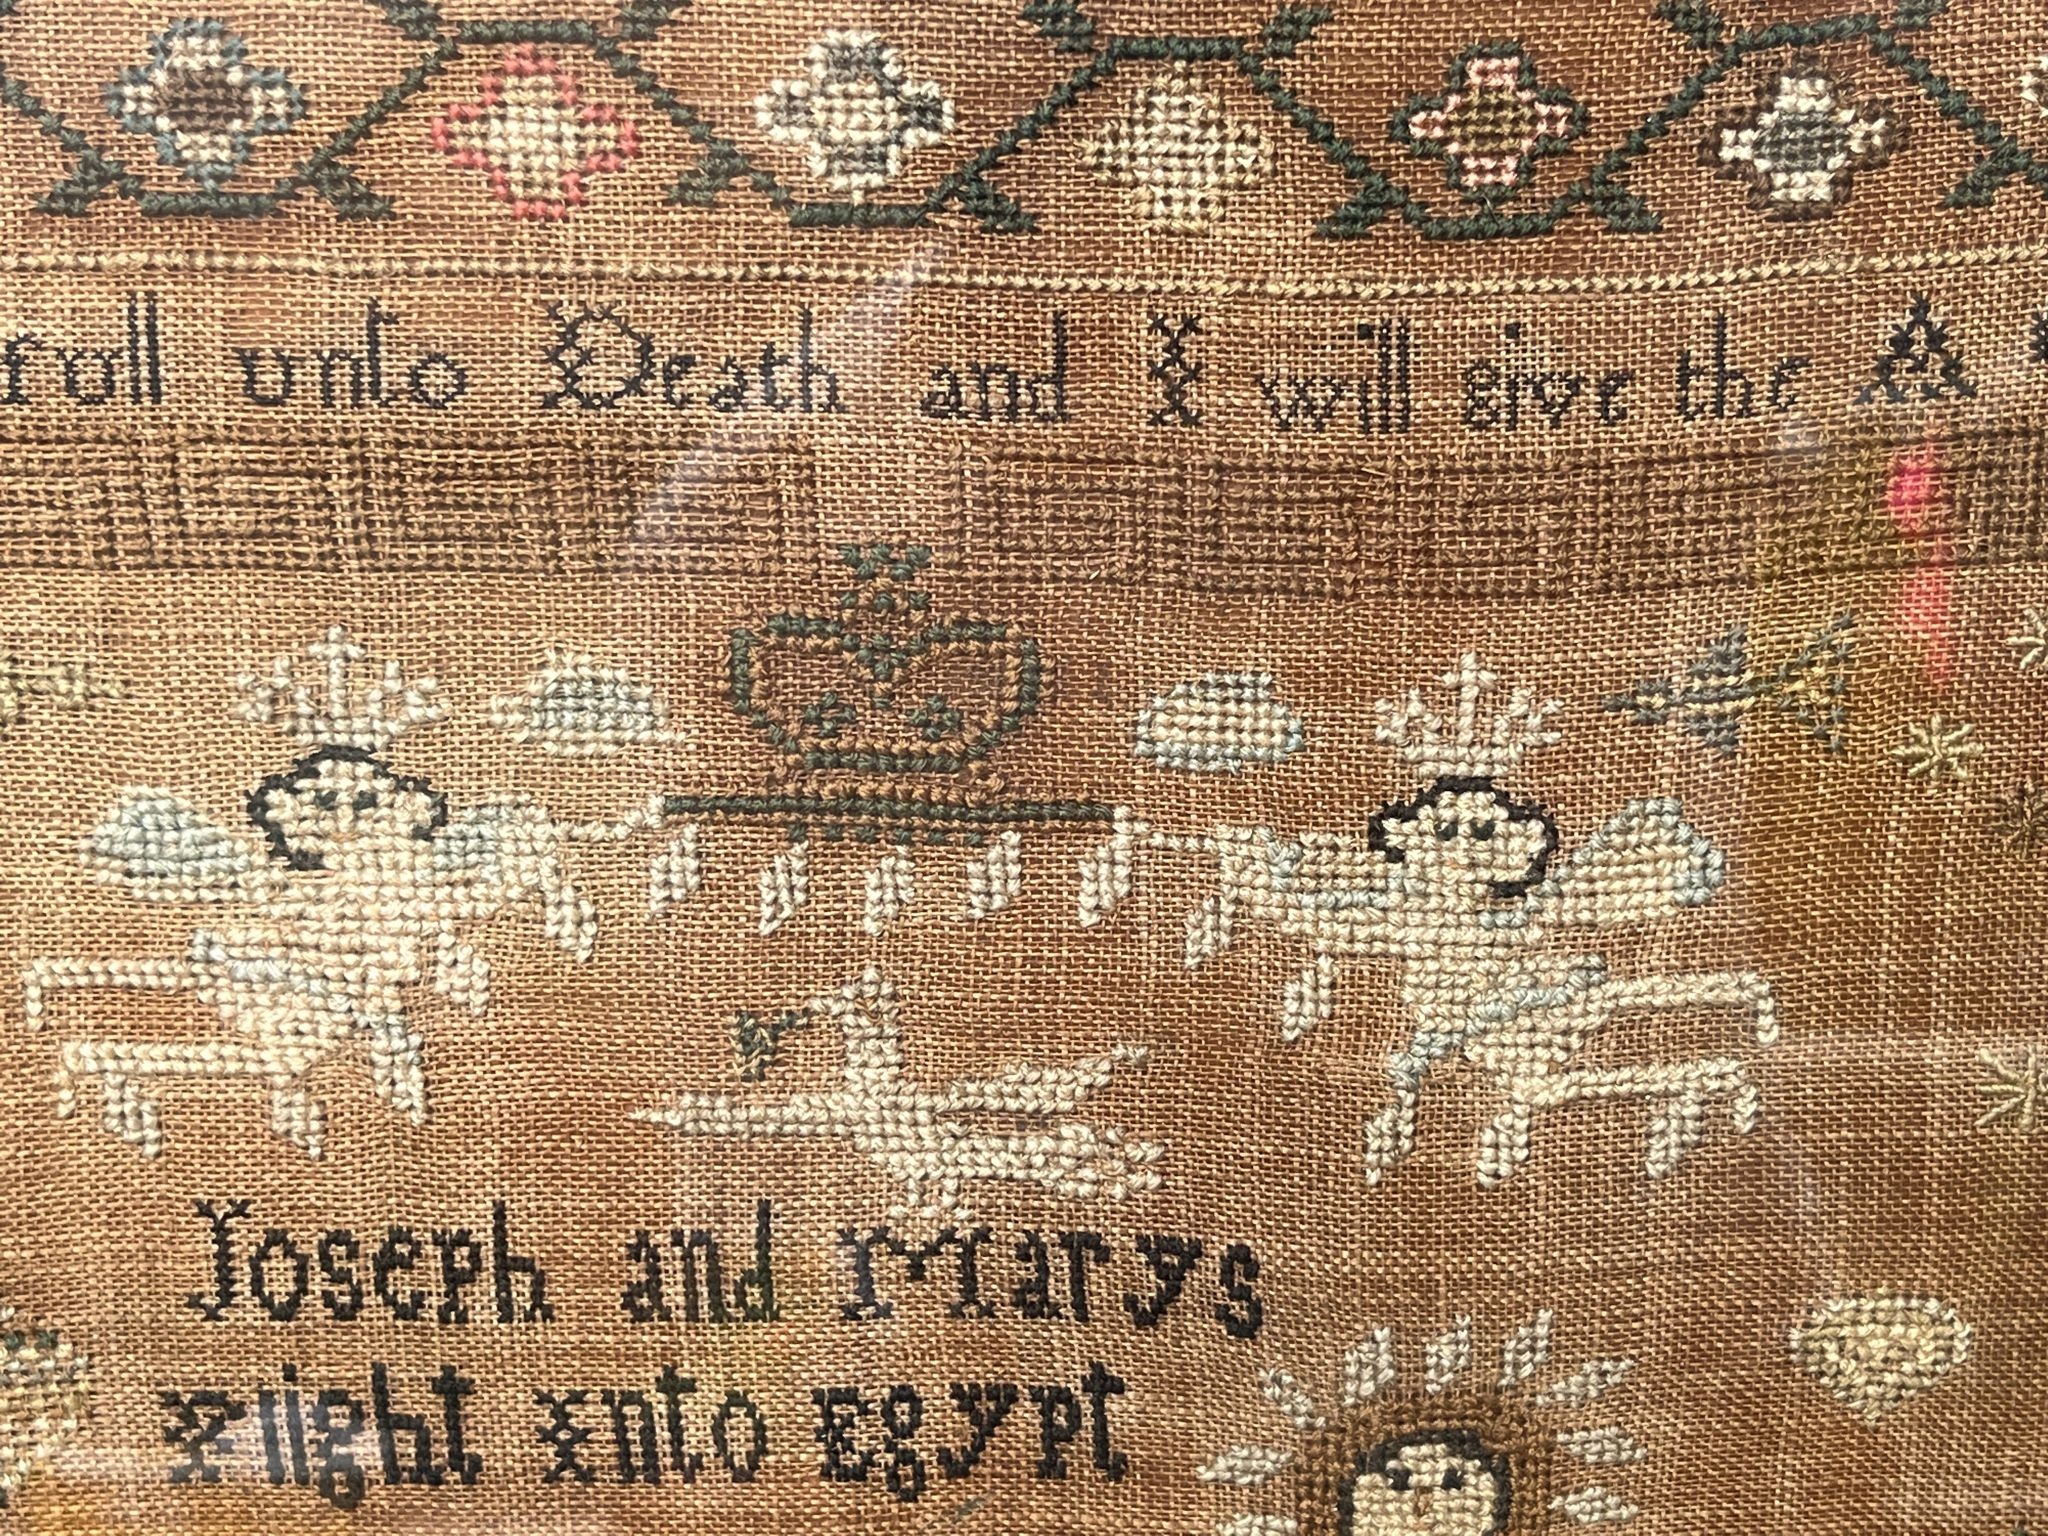 George 111 embroidery sampler of mary & josephs flight to egypt by ellis holiday aged 13 years - Image 4 of 8